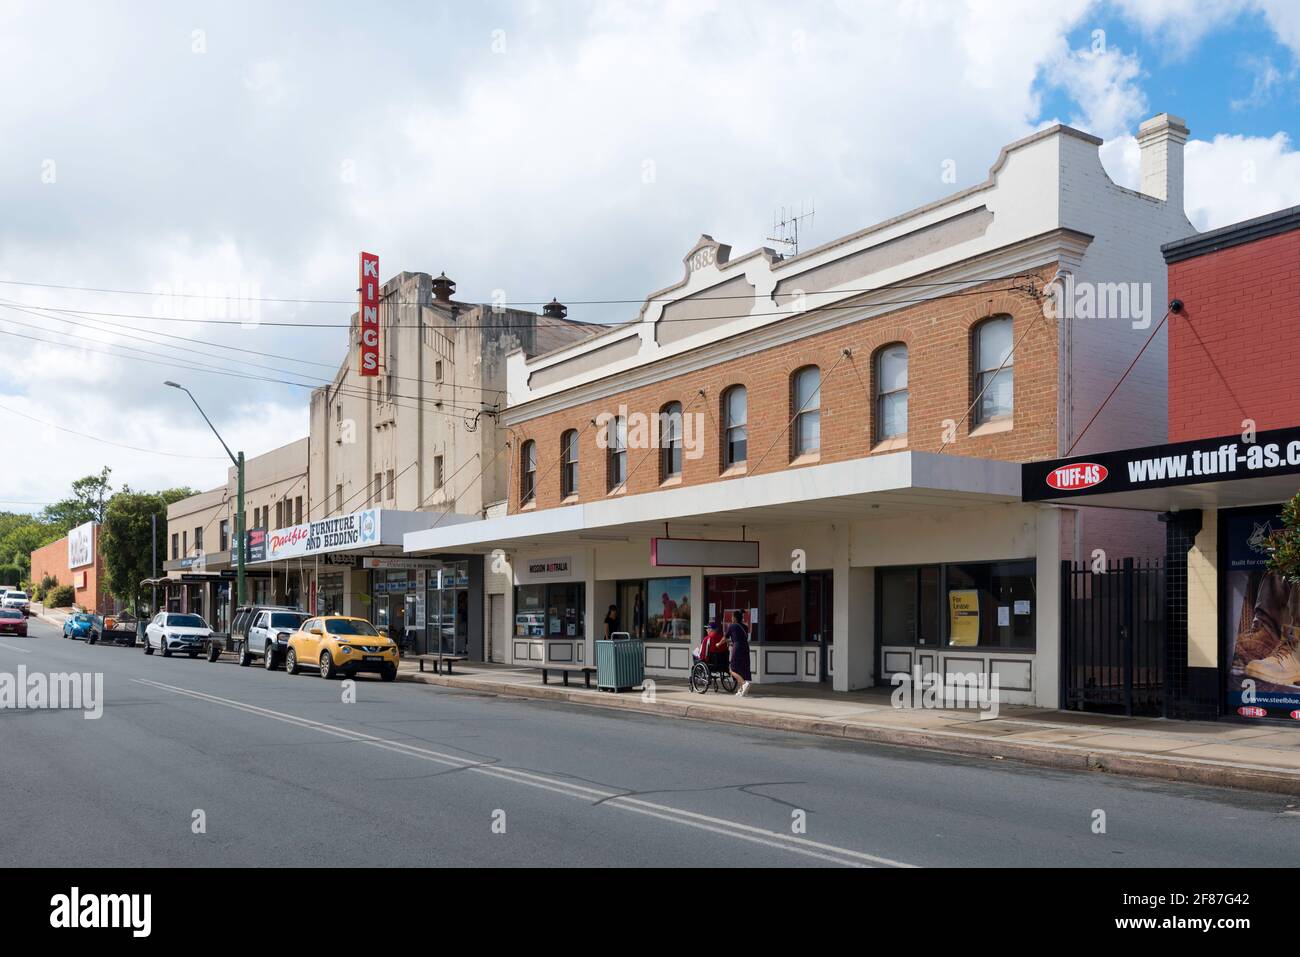 The Kings Theatre in the south coast town of Bega, New South Wales is a 3 storey art deco brick building built in 1936 designed by Kaberry and Chard Stock Photo